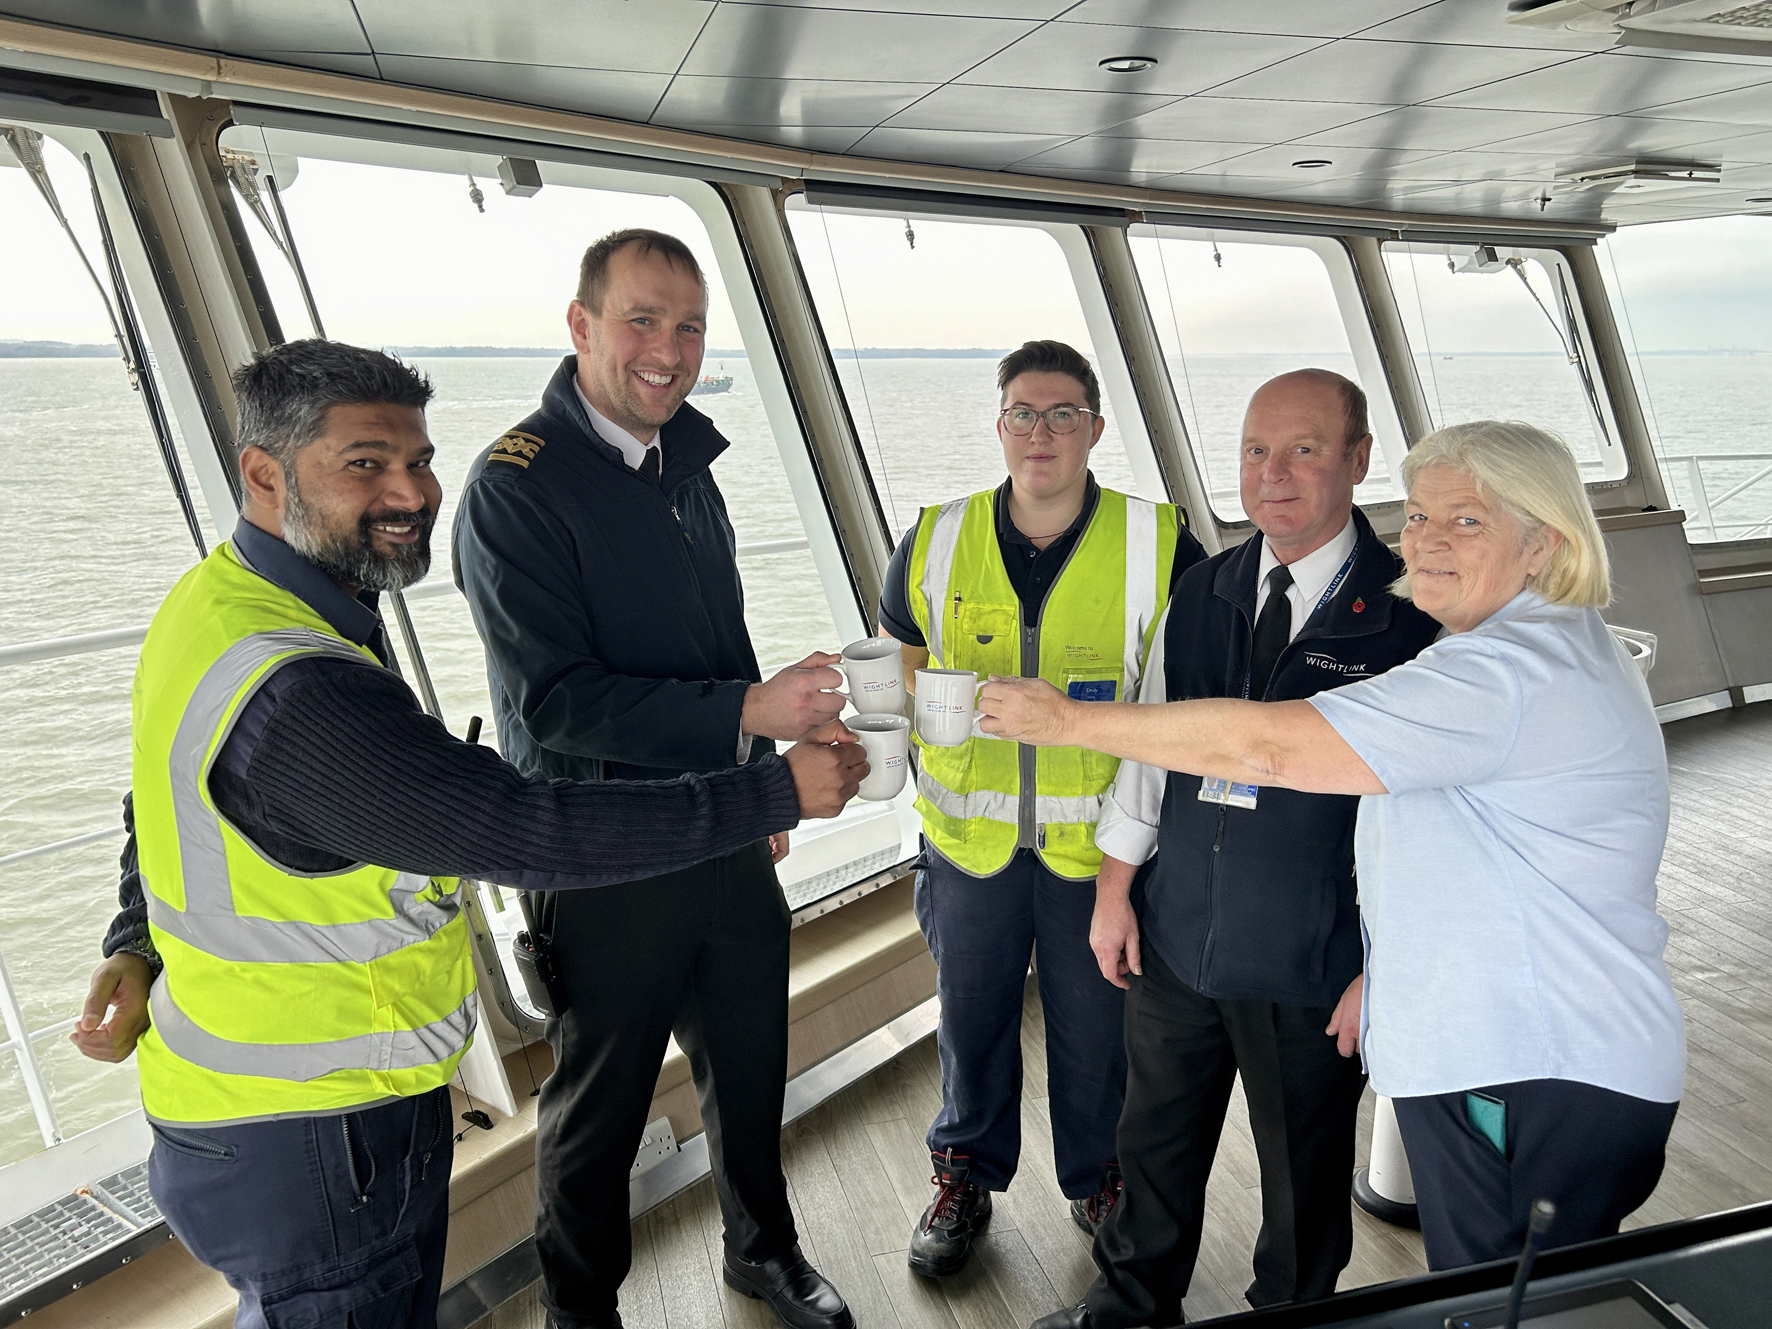 Wightlink employees standing in a circle raising a toast with cups of tea onboard the Victoria of Wight ferry